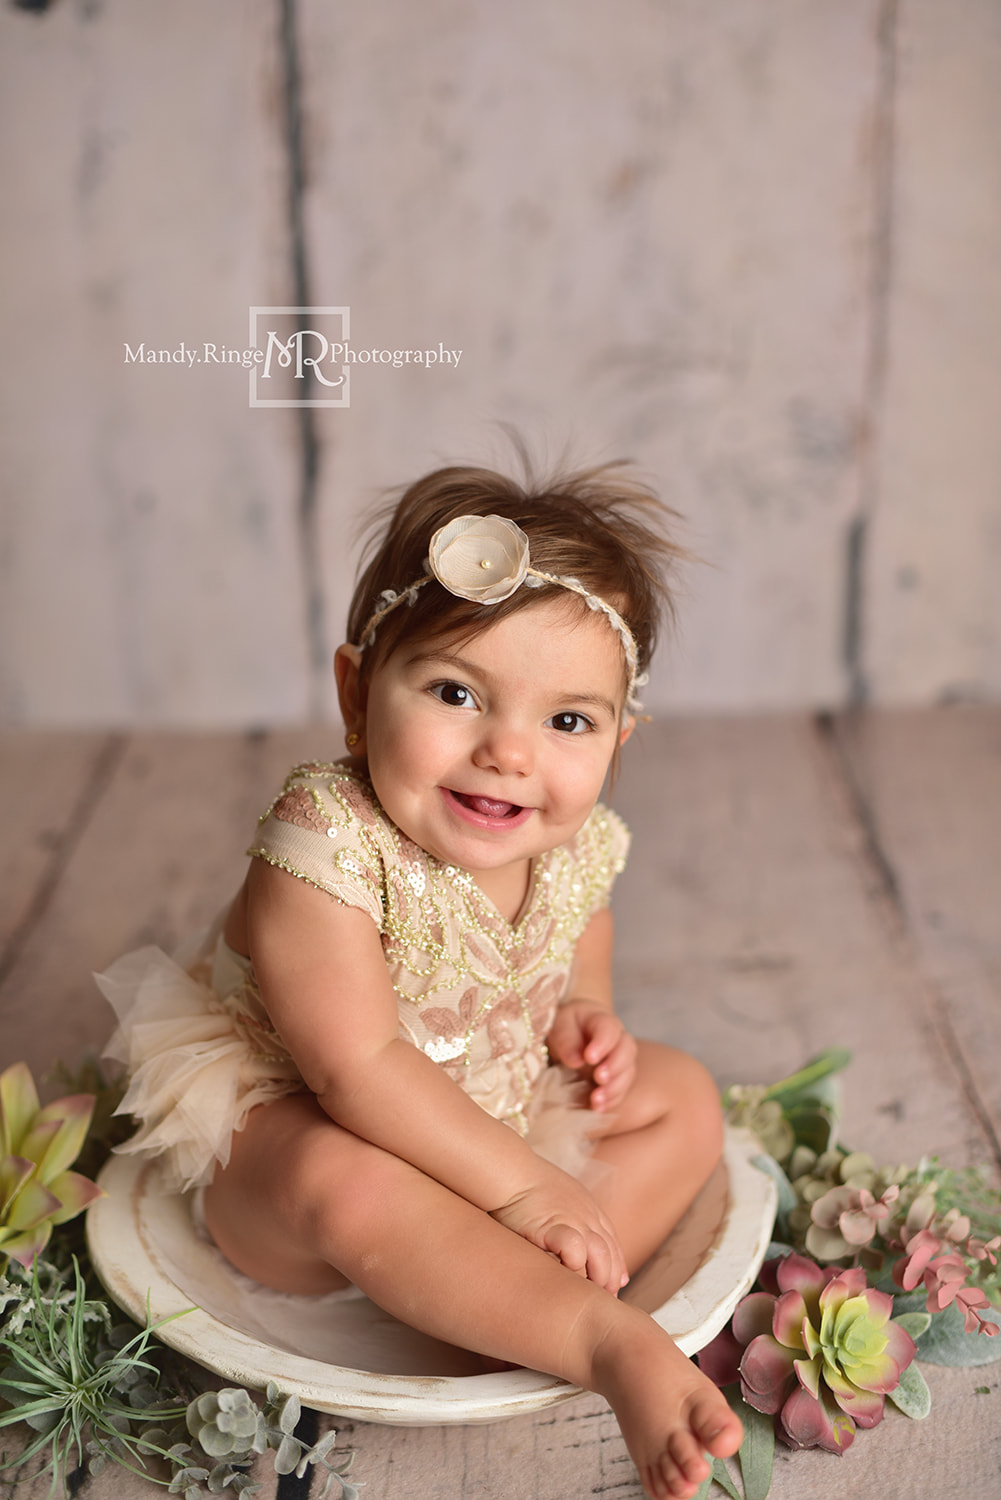 Milestone Session // Girl sitter session, 6 to 12 months, Jocelyn romper from Cora & Violet, Backdrop from Intuitions Backdrops // St. Charles, IL studio // Mandy Ringe Photography